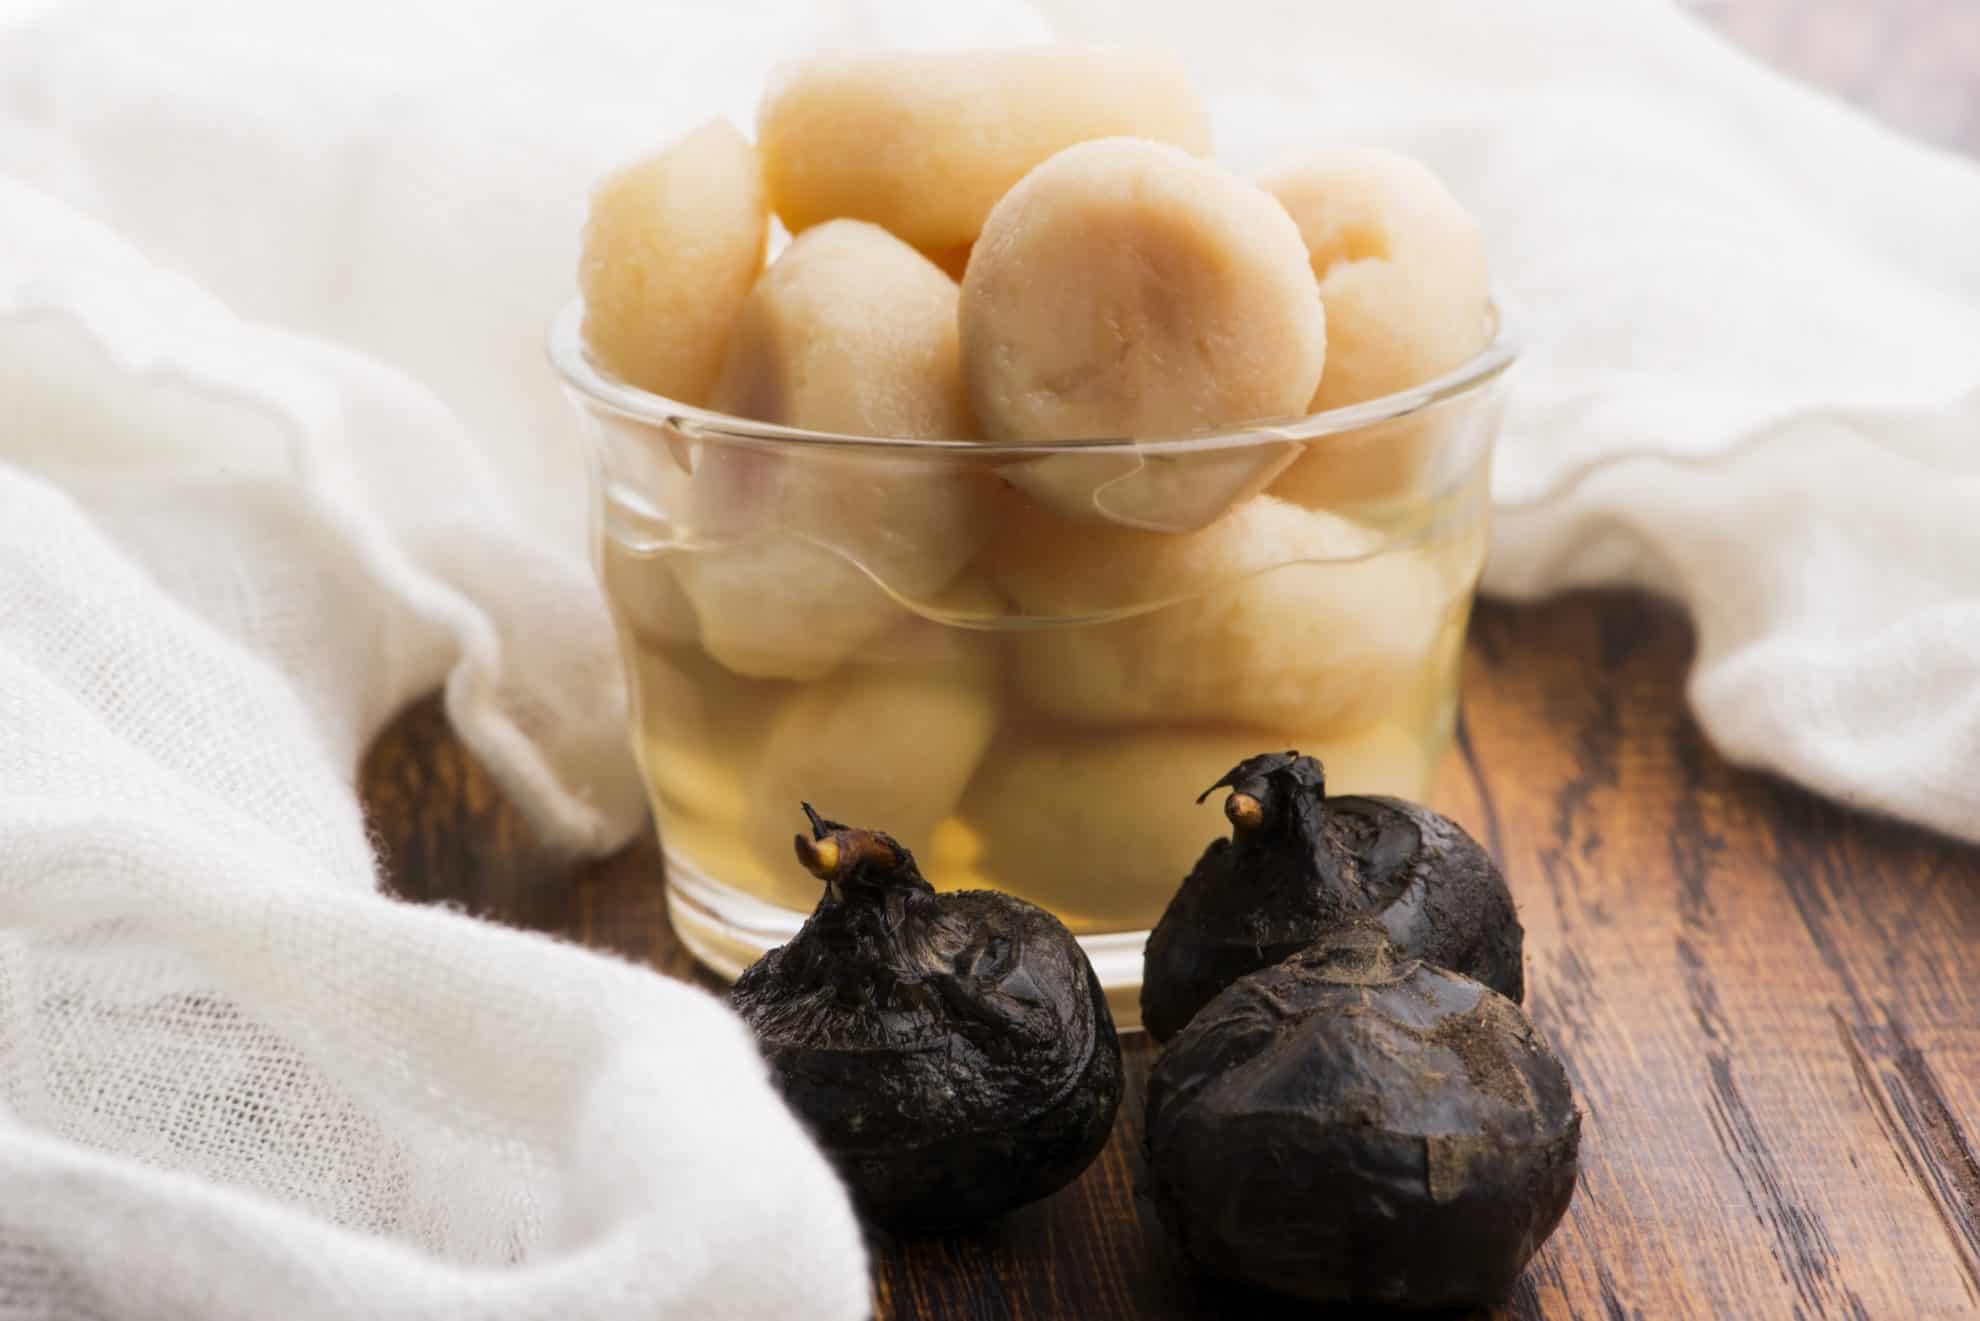 water chestnuts peeled and raw